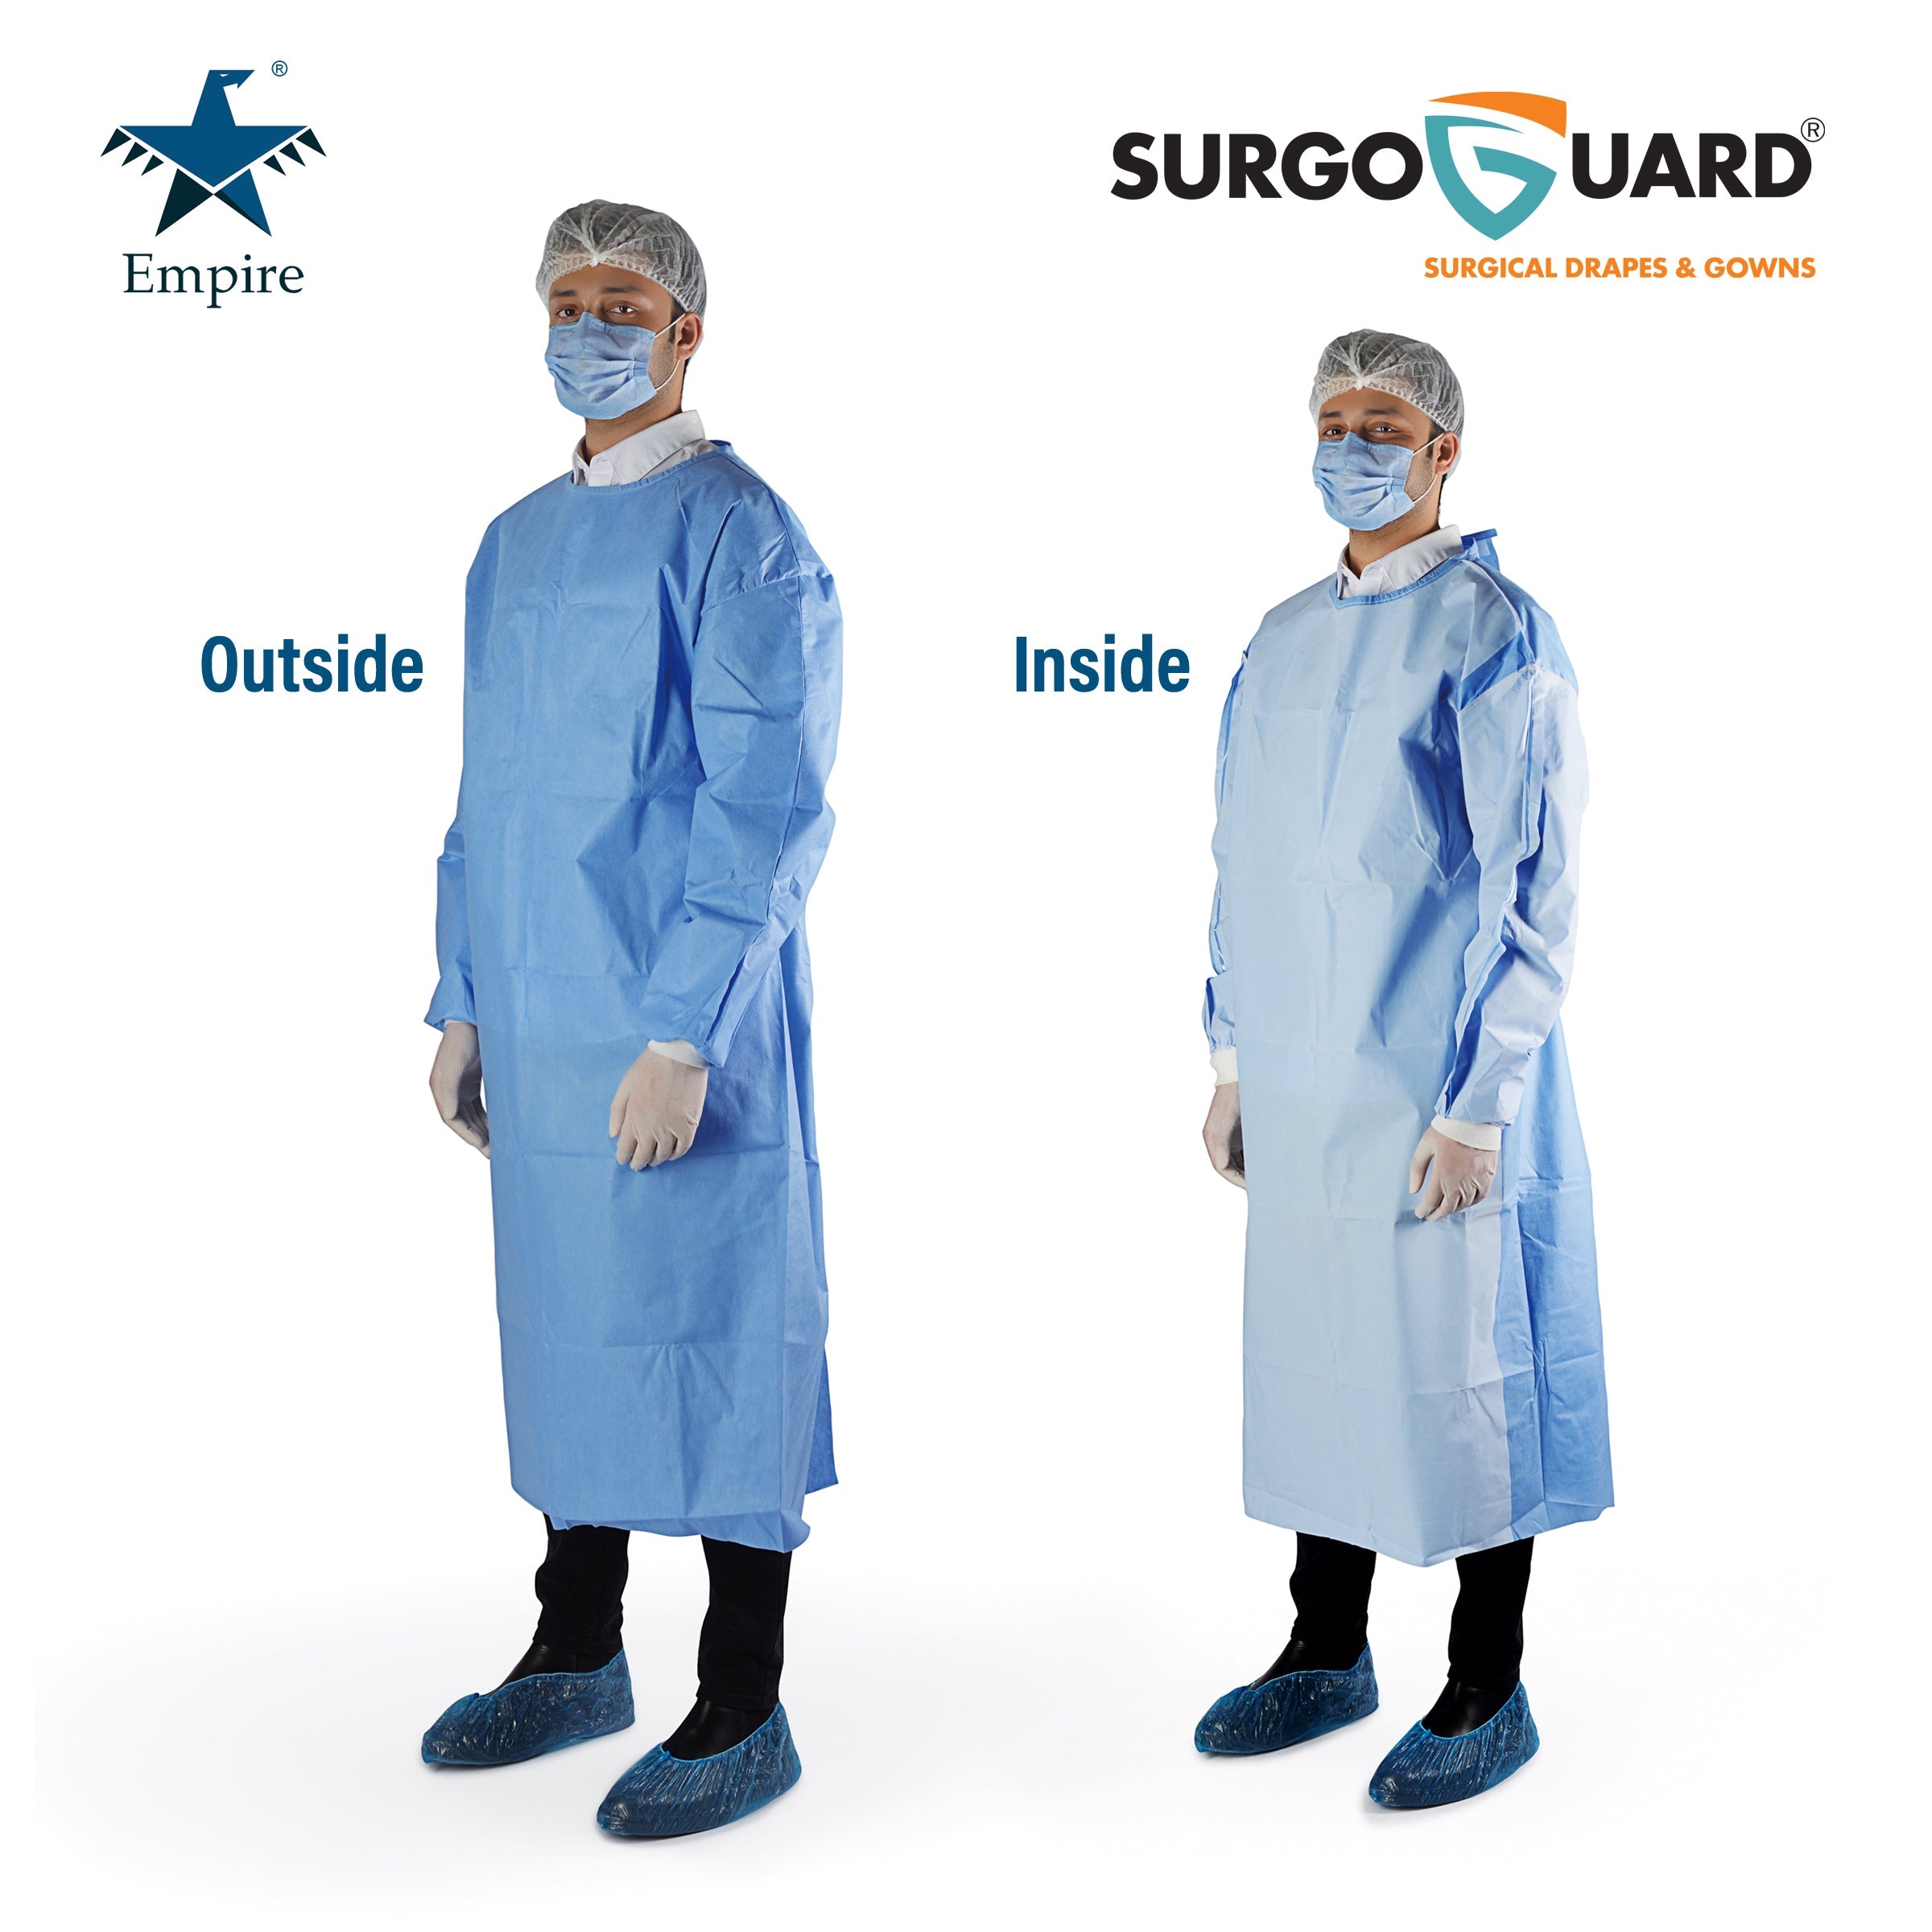 Case 40 SurgoGuard AAMI Level 4 STERILE Disposable Reinforced Impervious Surgical/Surgeon Gown 43g SMMS+30g PE Fabric, Isolation Gown Long Sleeves, Knitted Cuffs, Spunlace Waist Ties (Extra Large) XL - EmpireMedical 